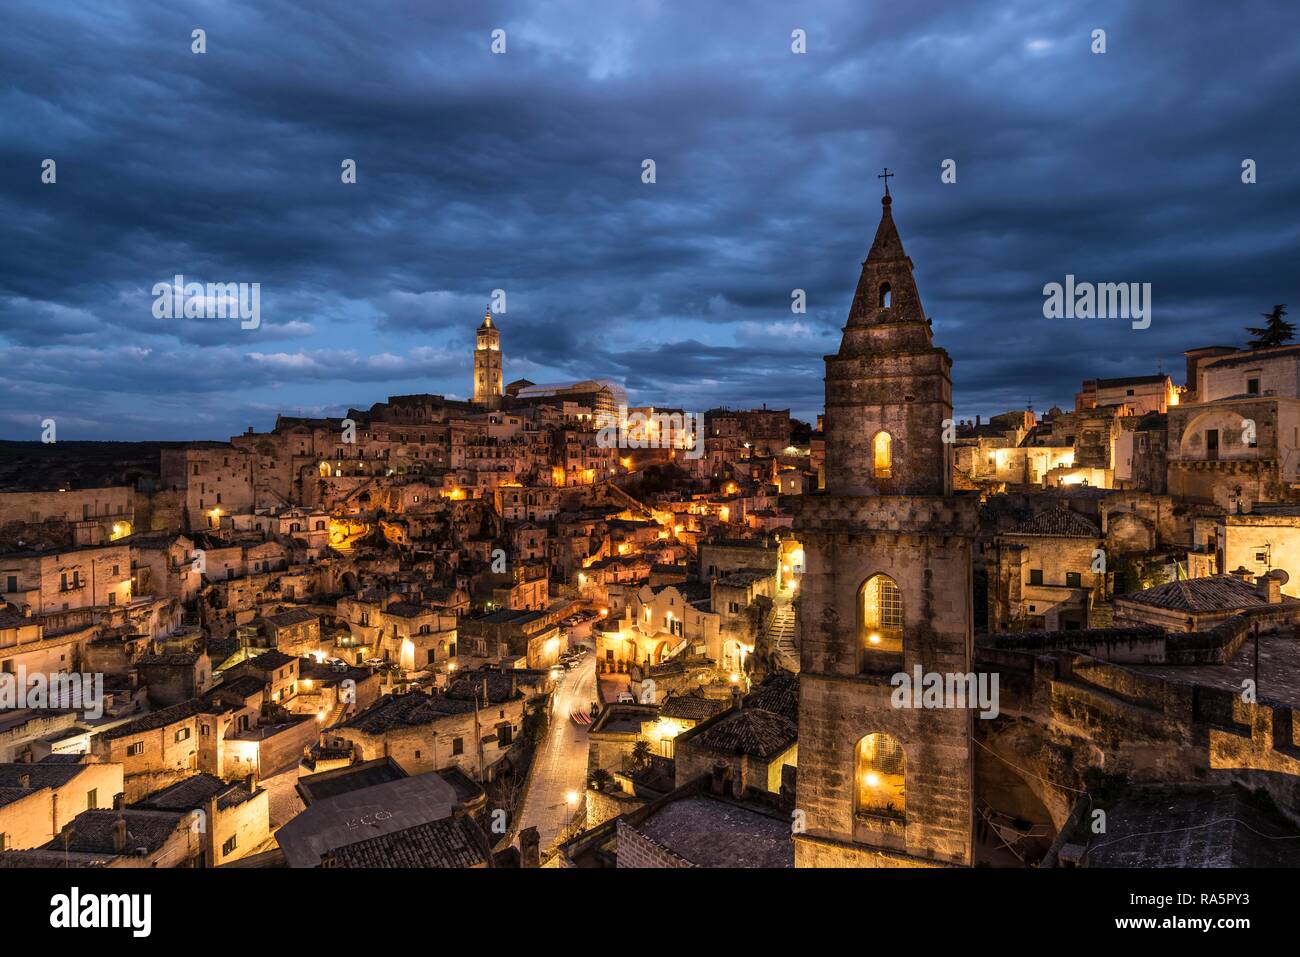 Church tower San Pietro Barisano in front of illuminated old town with cathedral, blue hour, Matera, Basilicata, Italy Stock Photo